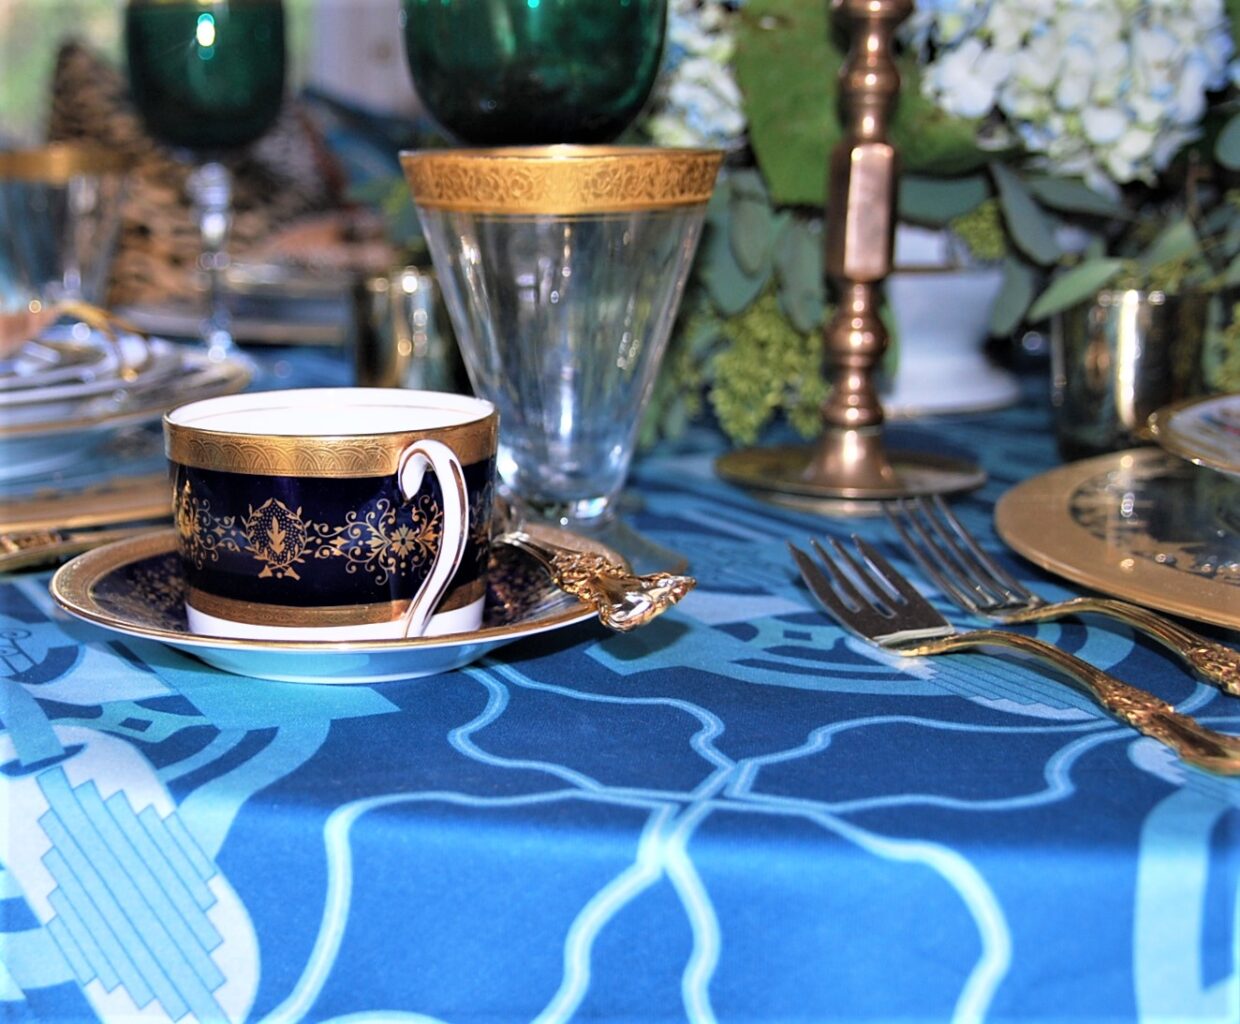 7 Tips to Set an Elegant Holiday Table with Bold Color and Pattern - The Pillow Goddess blog!